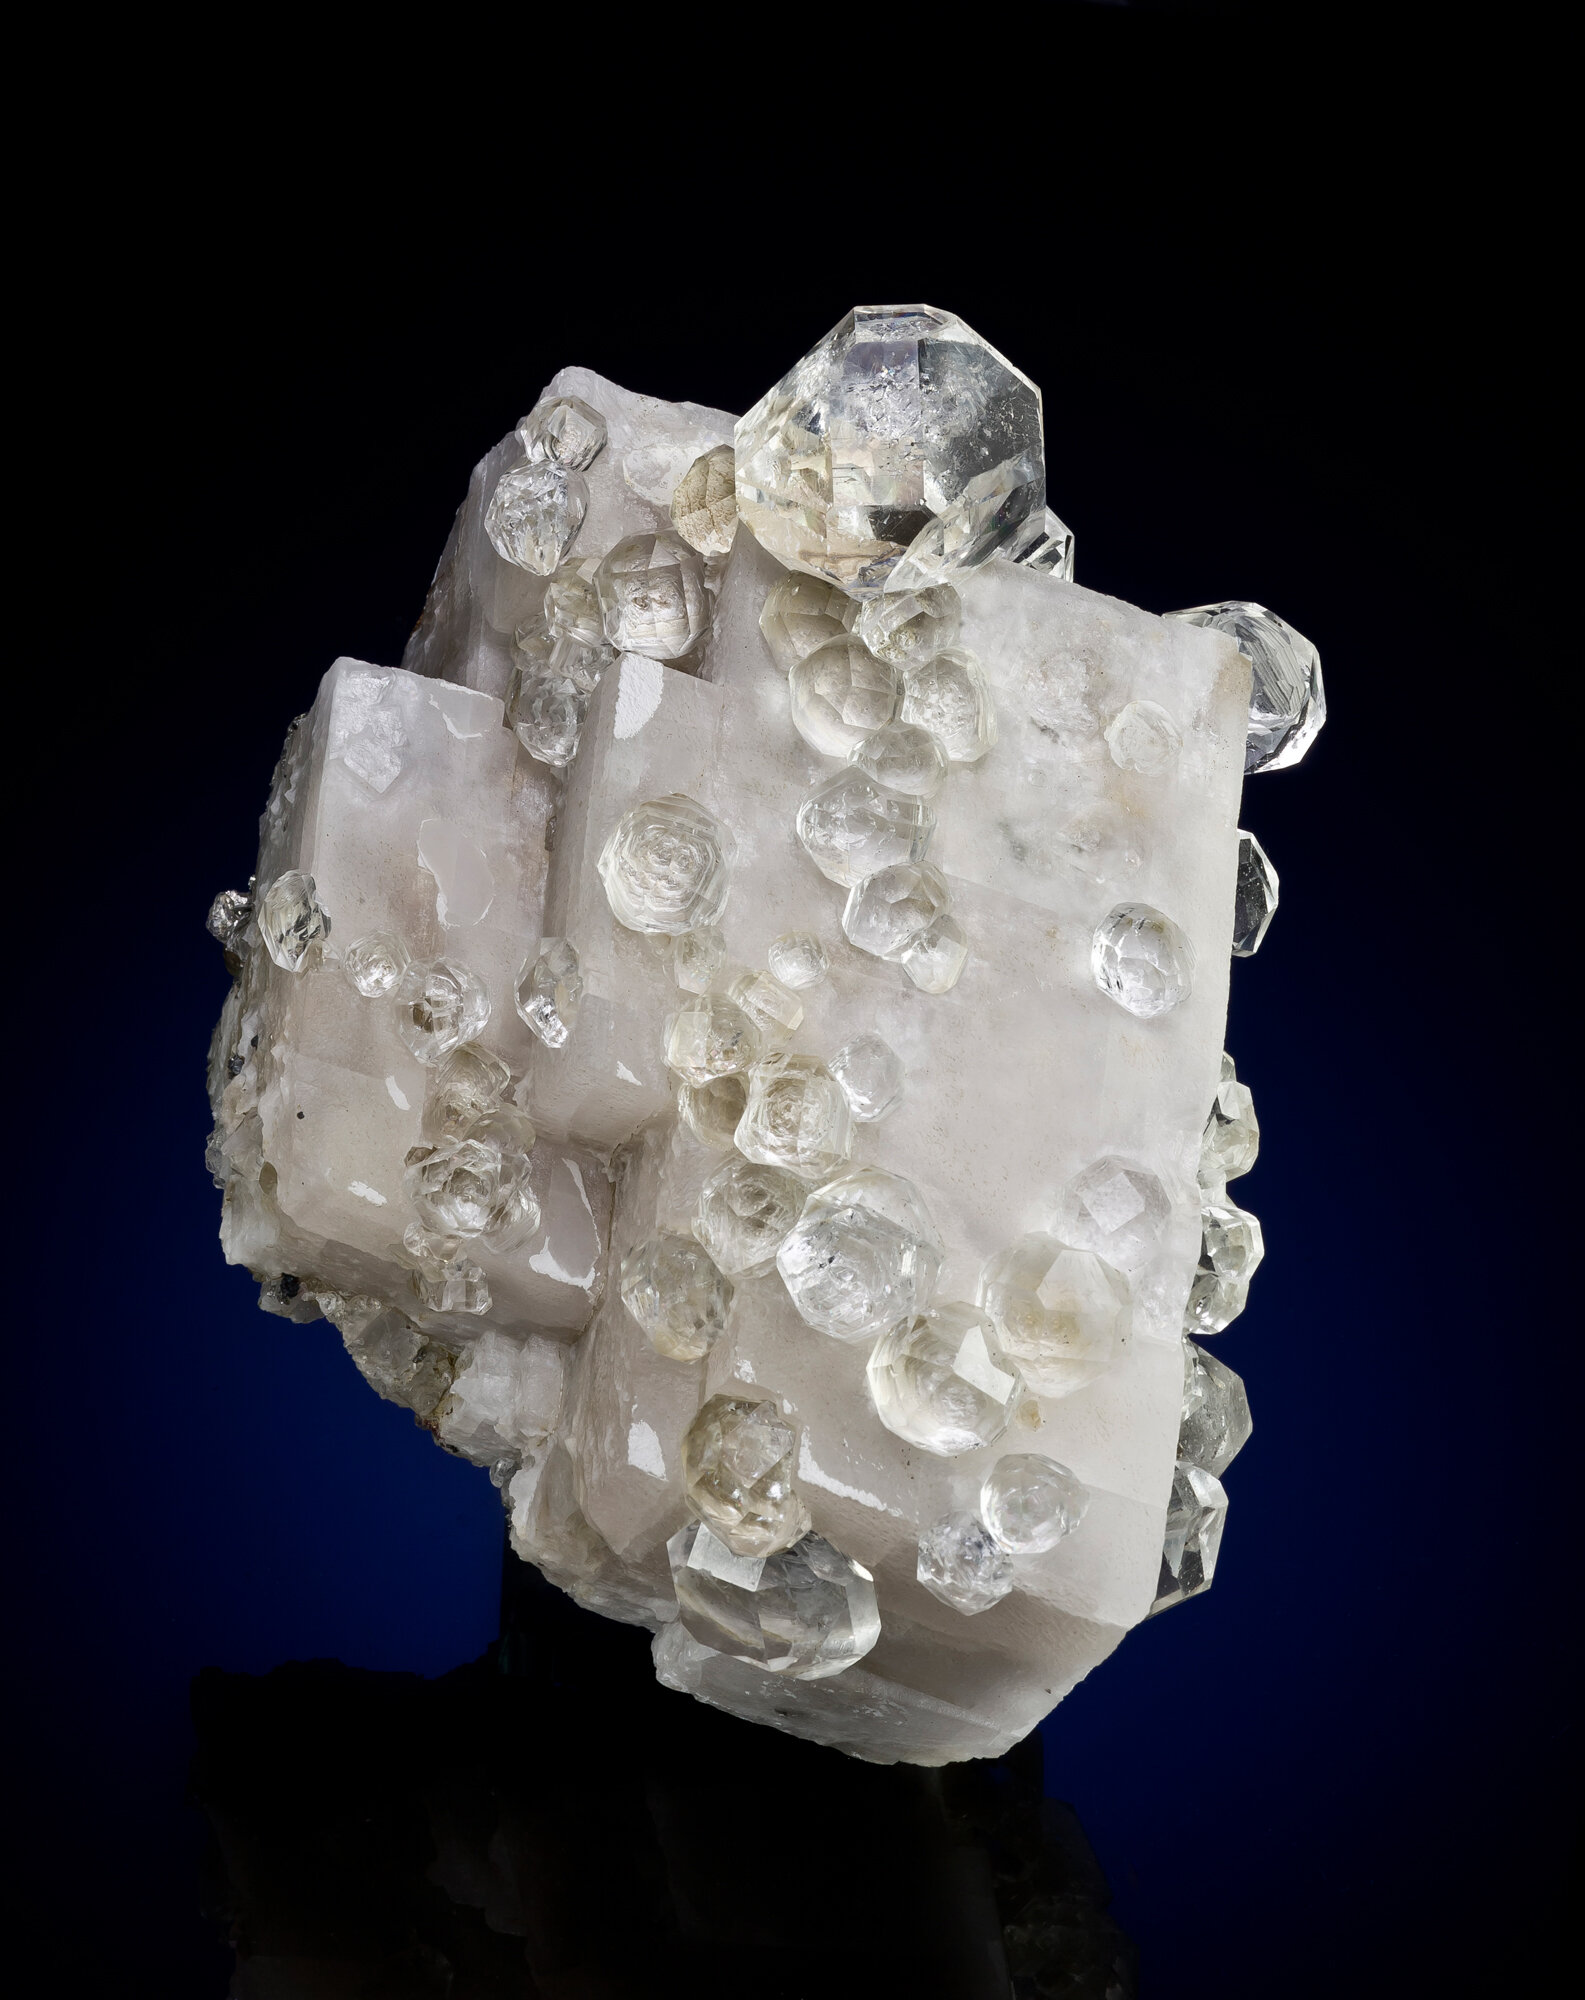  Fluorite crystals on calcite, 17 cm, from Huanggang mine No. 5, Keshiketeng County, Chifeng Prefecture, Inner Mongolia Autonomous Region, China. Found in 2011. 